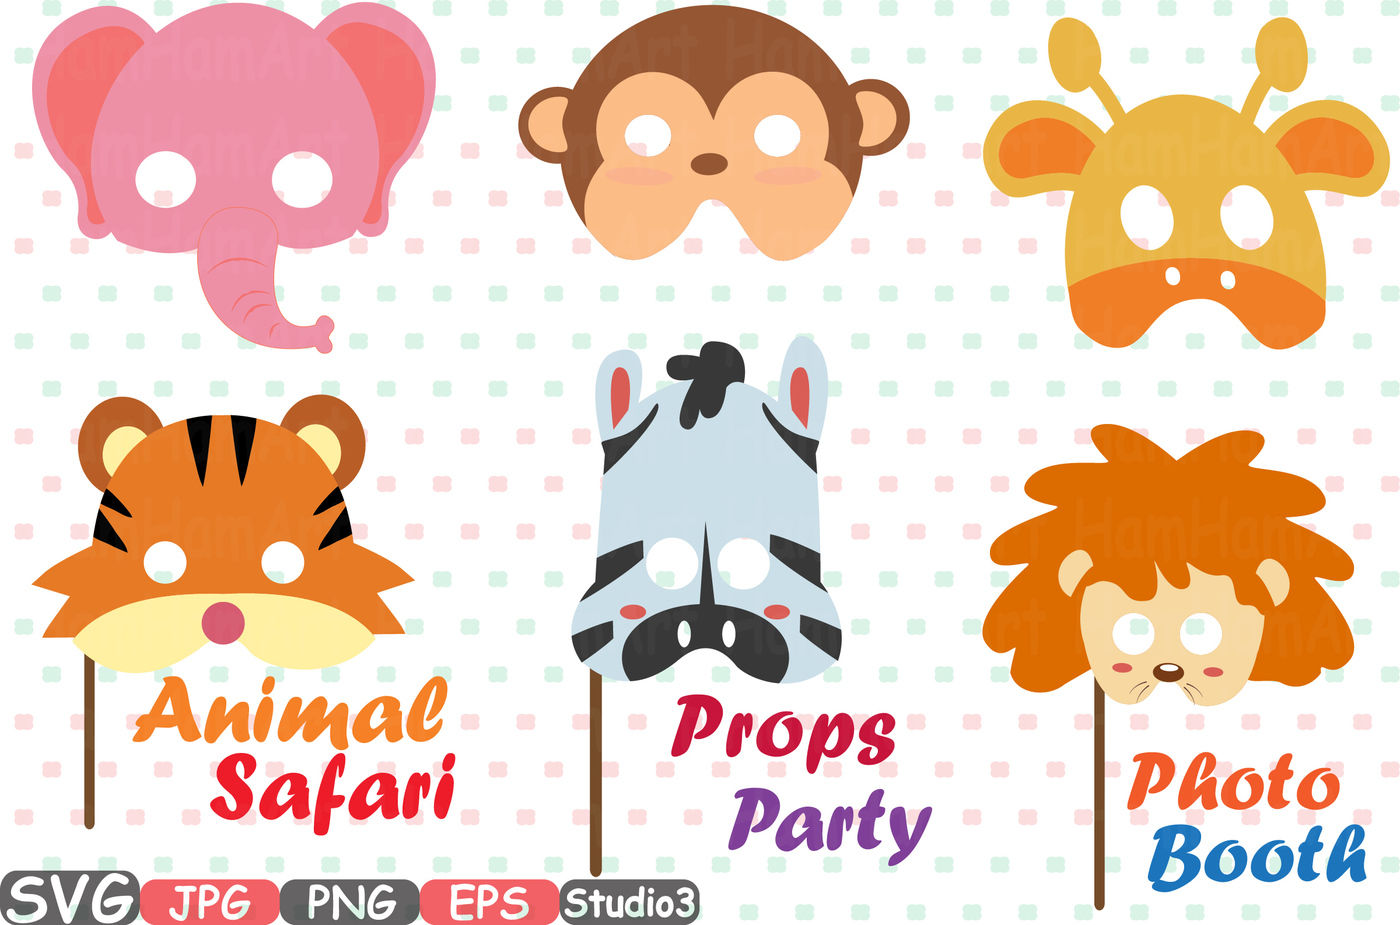 Download Props Africa Safari Wilderness Mask Booth Party Birthday Silhouette Svg Clipart Bunting Cutting Files Digital Svg Eps Png Jpg Vinyl Sale Woodland Circus Forest Mask Lion Tiger Zebra Elephant Monkey Giraffe 208s